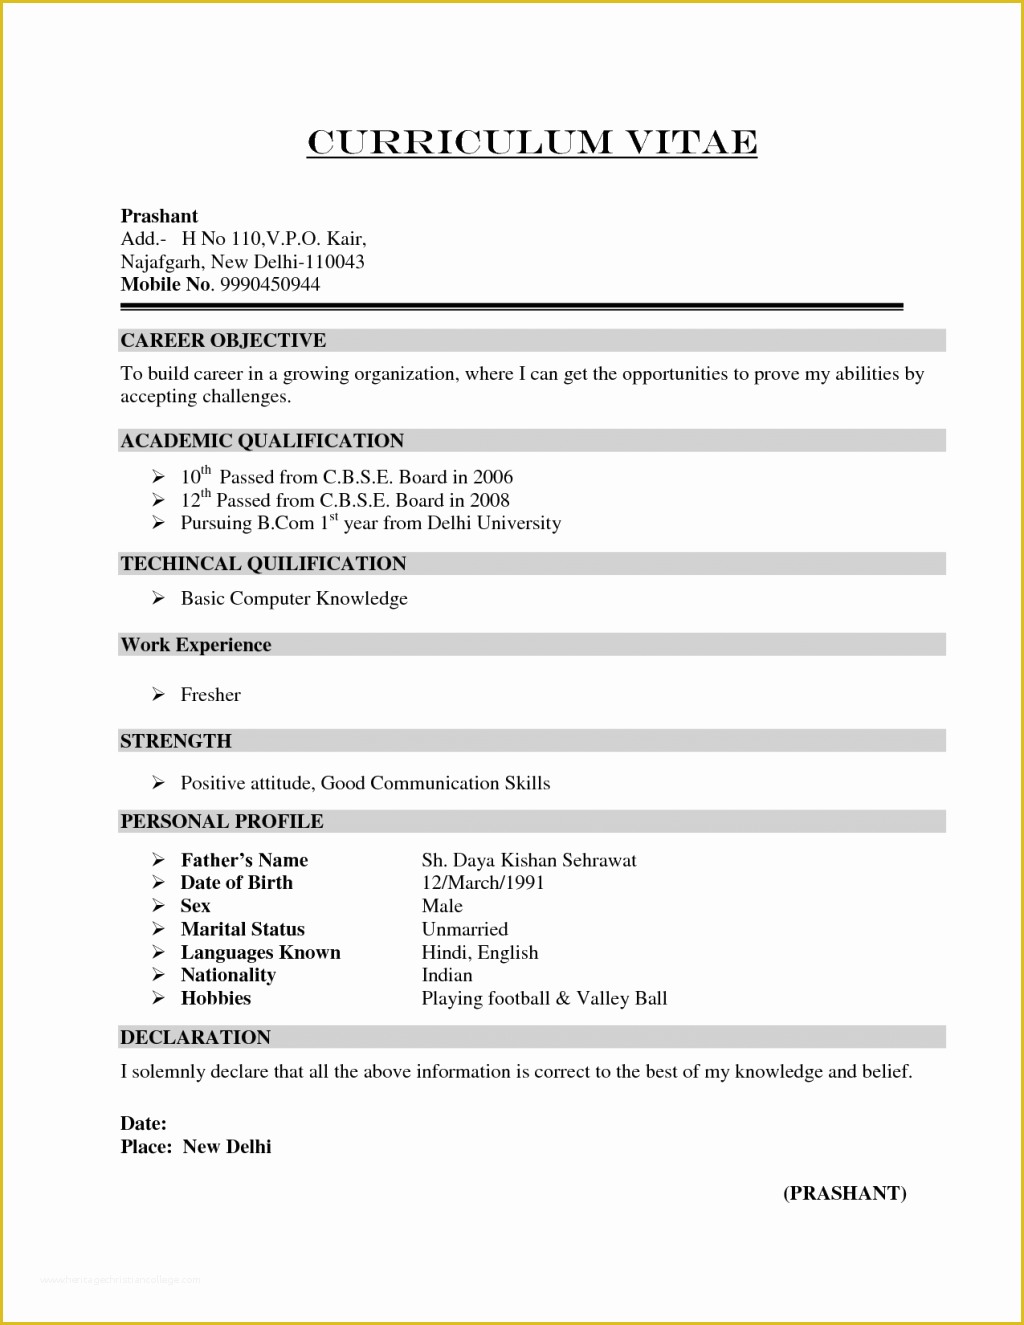 Free Windows Resume Templates Of Resume Template Best Resume Templates for Freshers Free